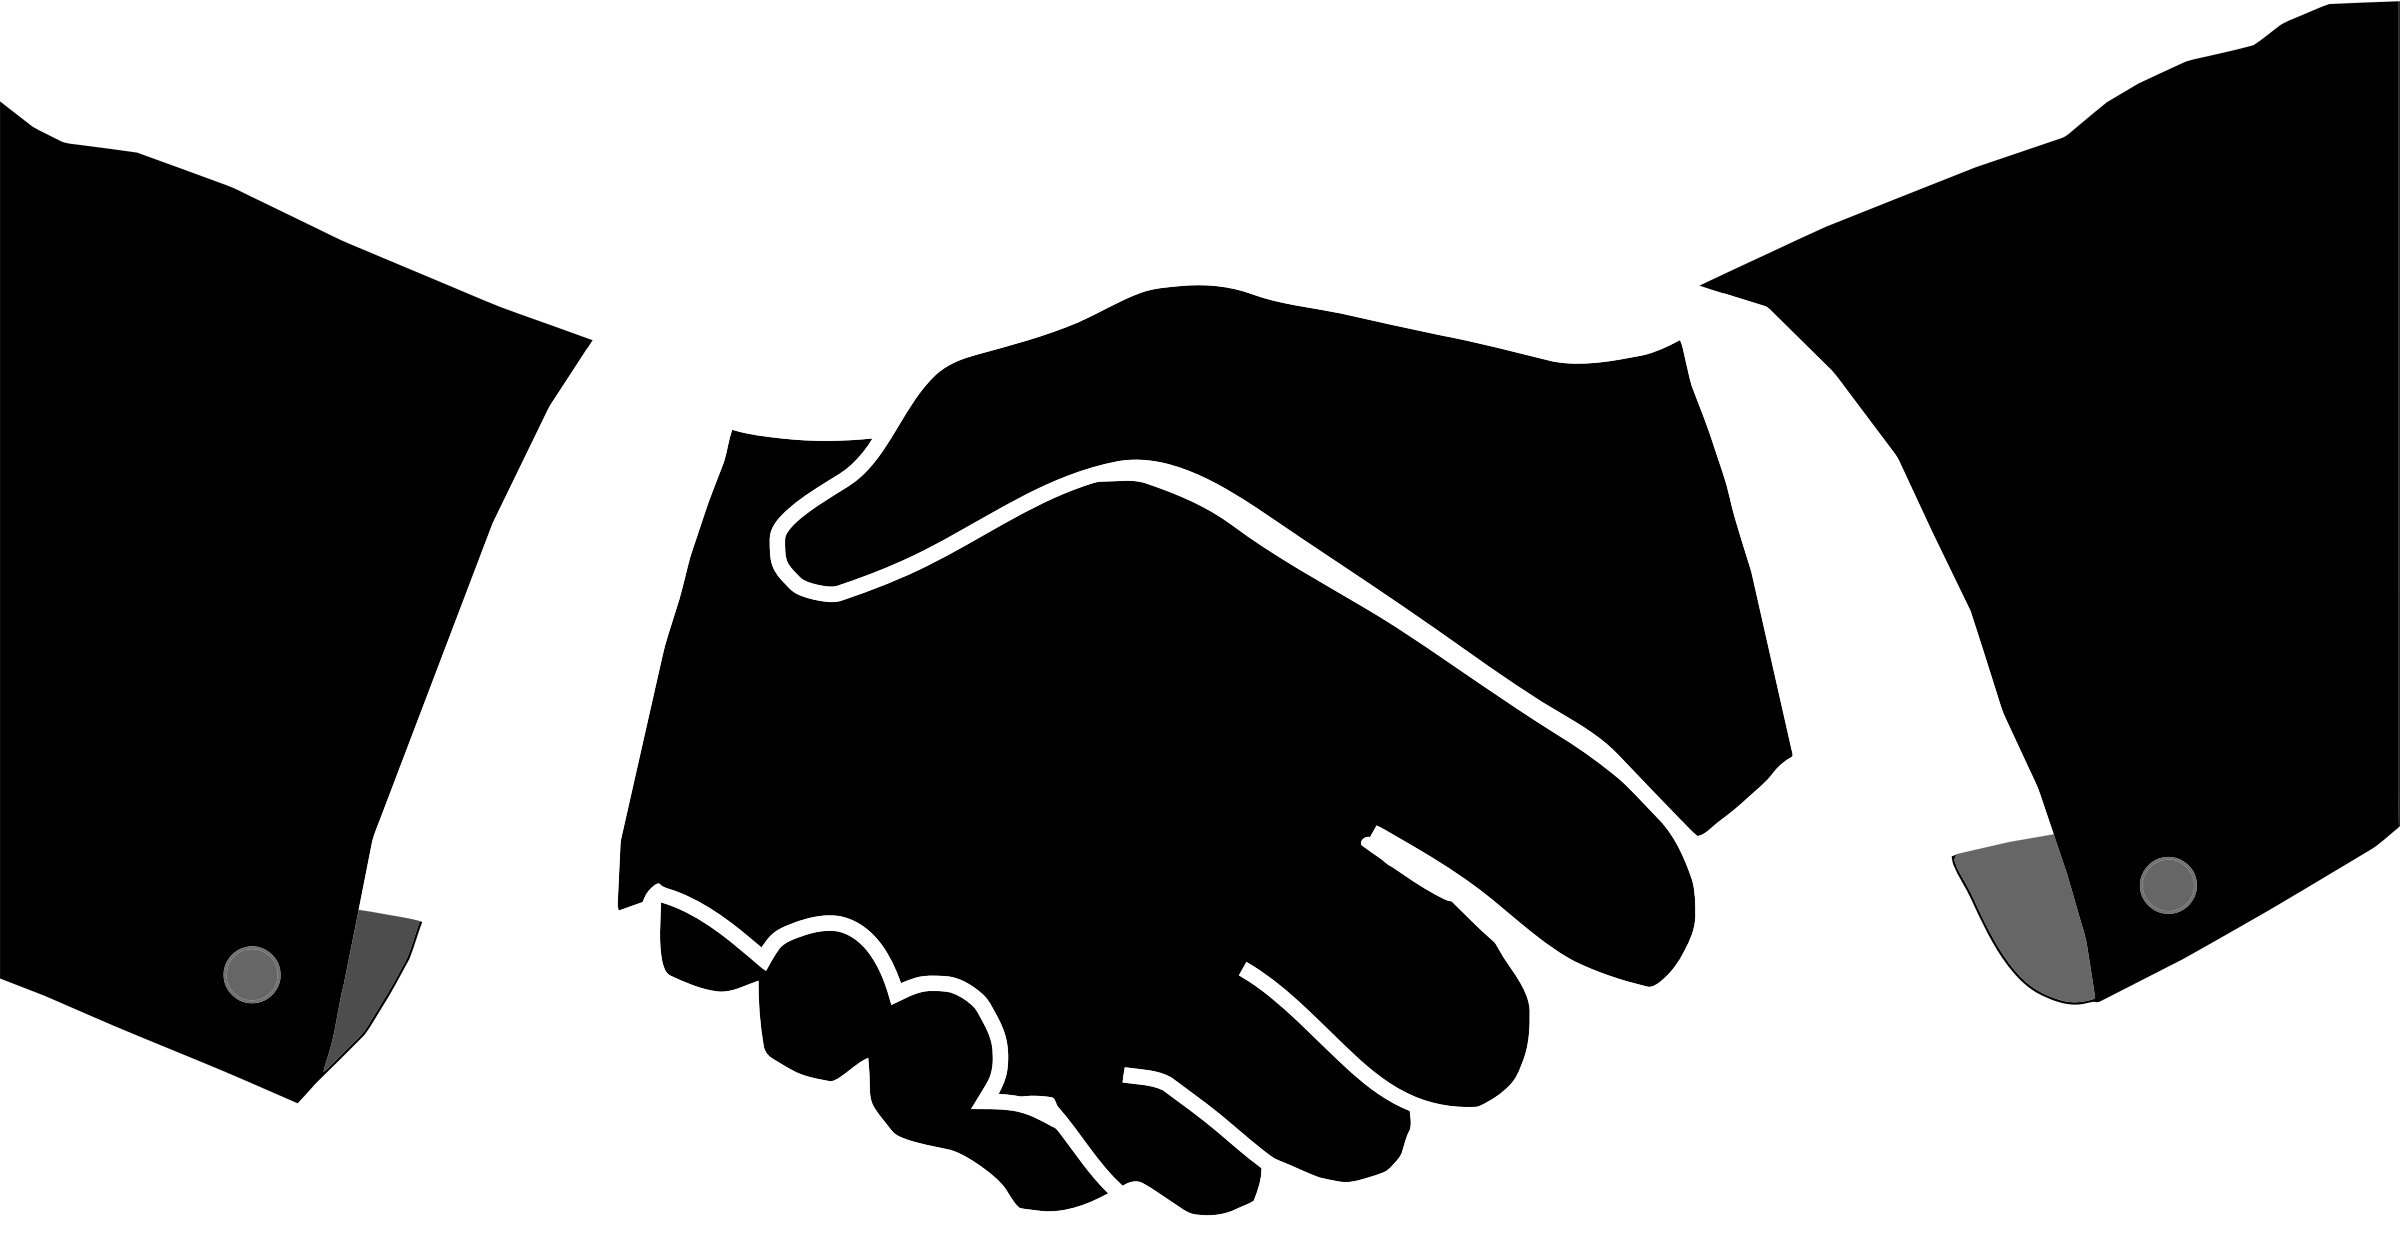 Shake hand clipart png 